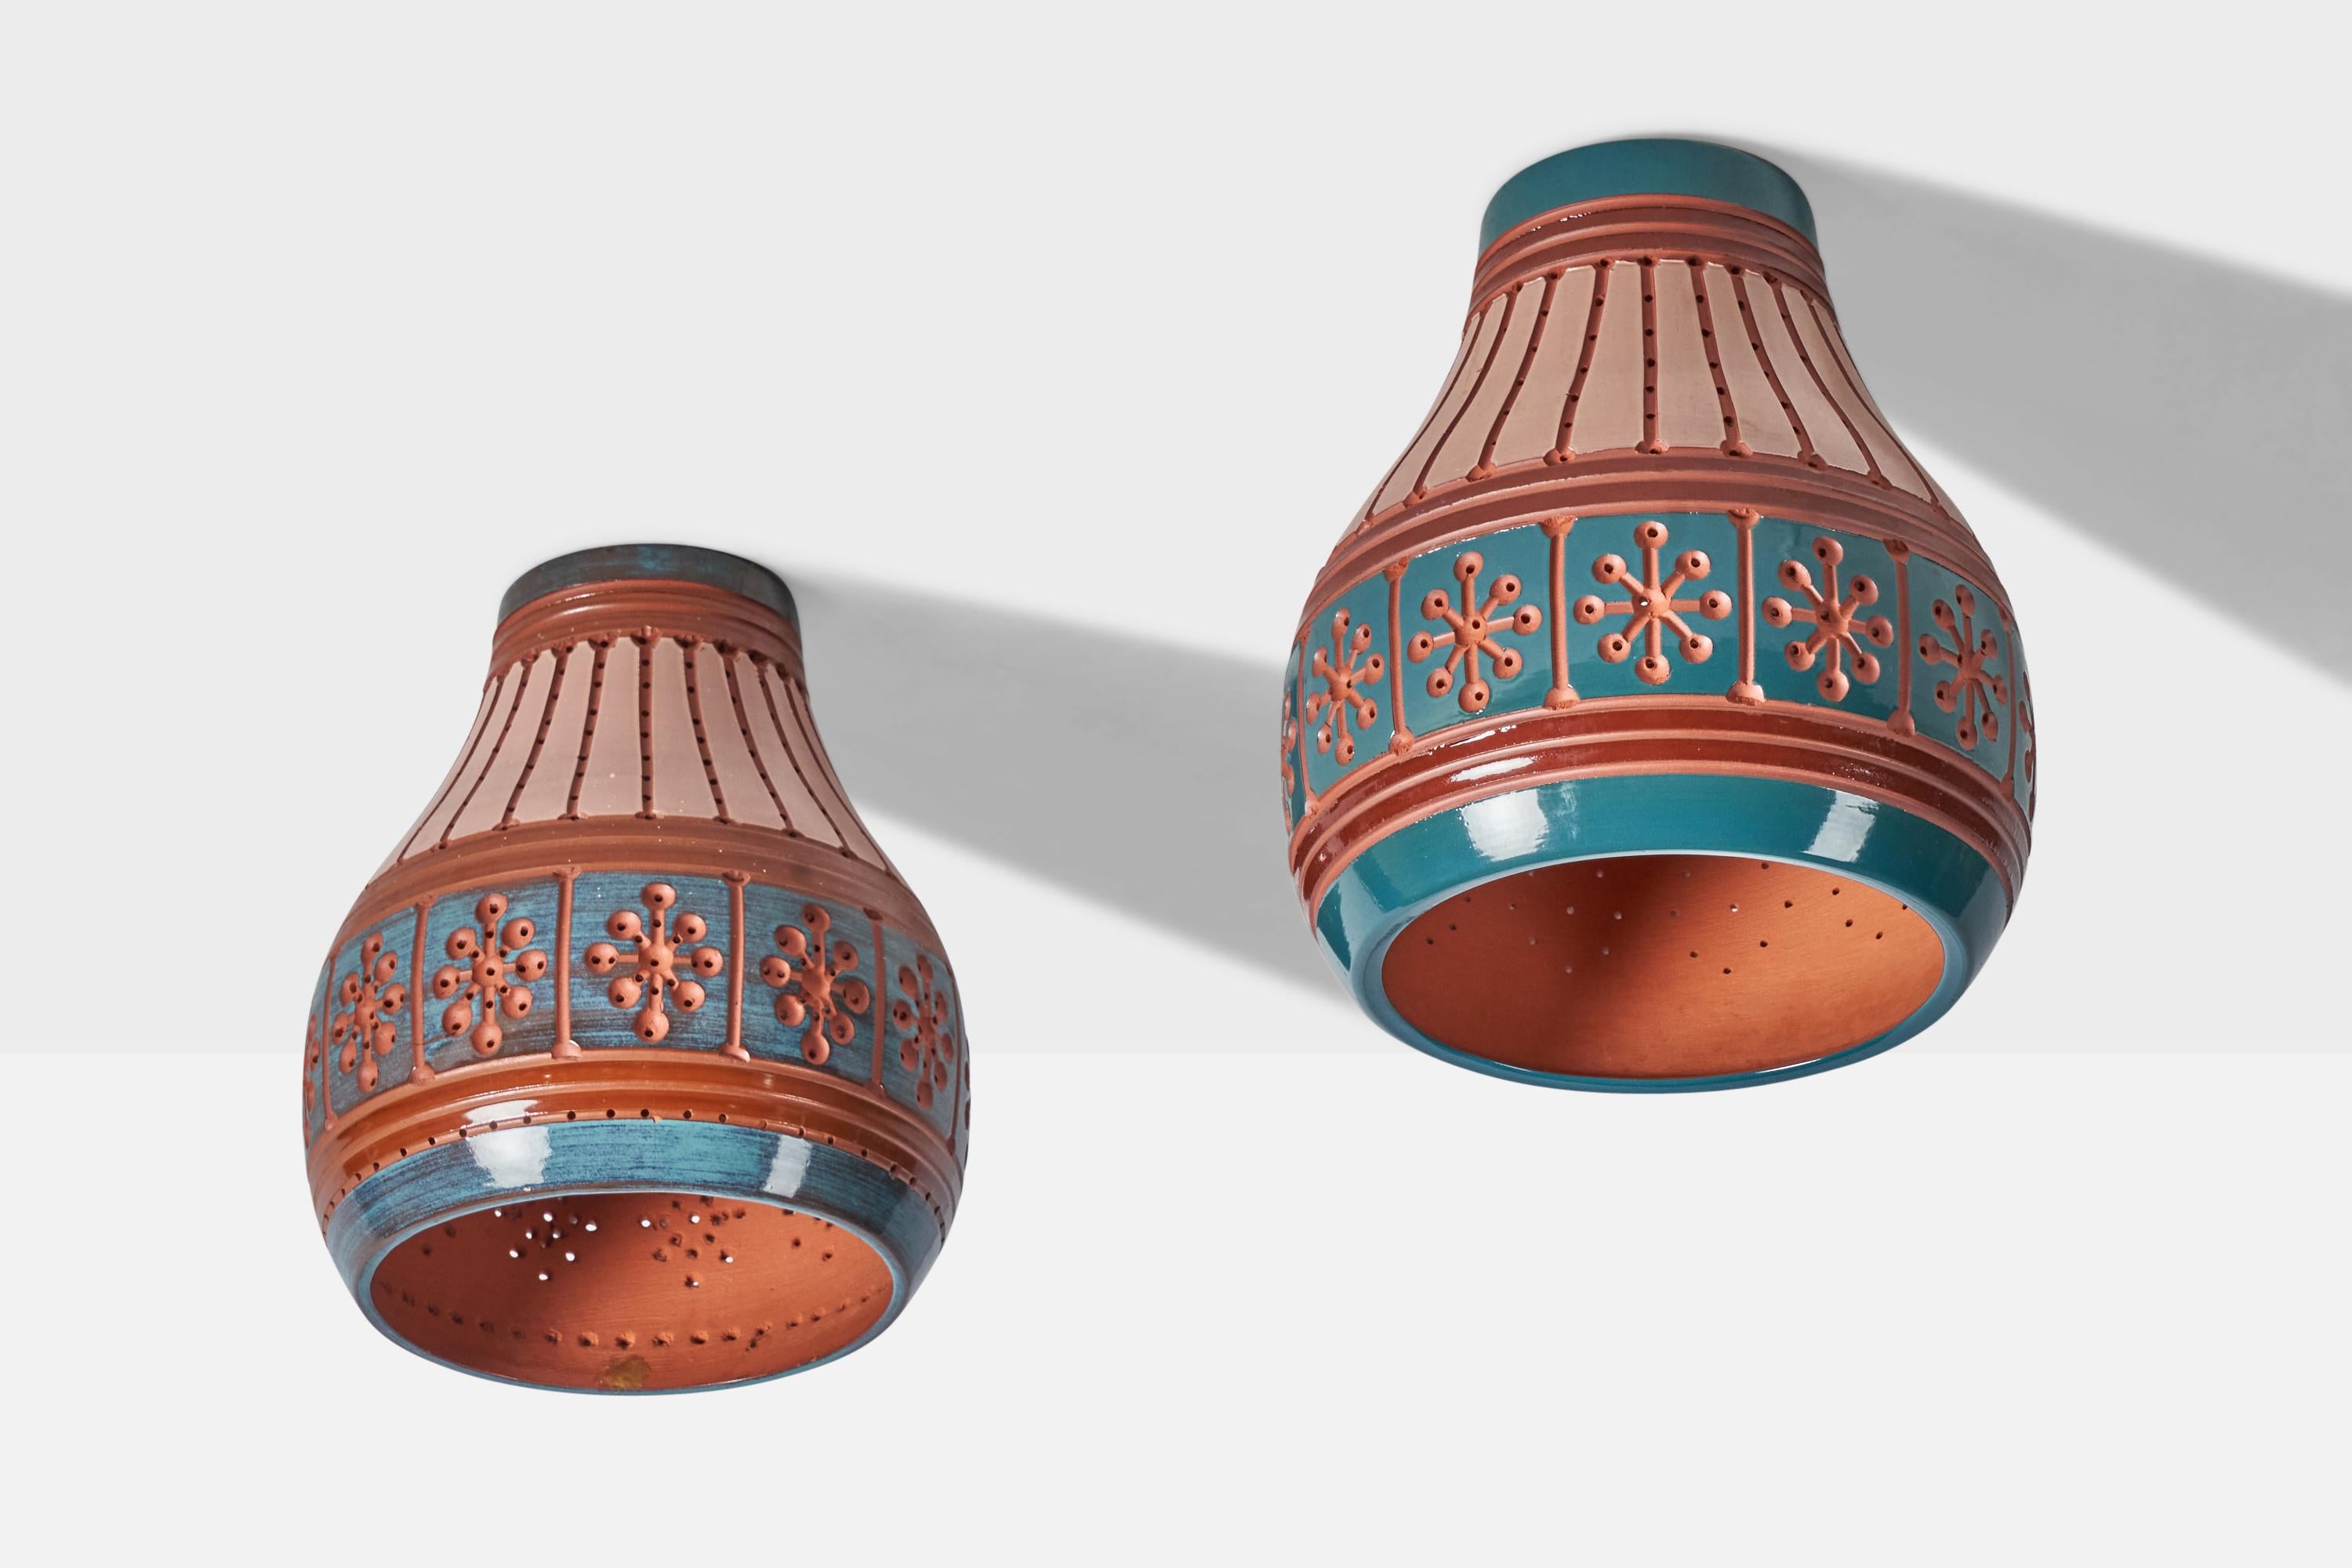 
A pair of hand-painted pink, red and blue ceramic flush mounts or pendant lights, designed and produced by Martha & Beaumont Mood, San Antonio, Texas, USA, 1970s 
Overall Dimensions (inches): 12.5” H x 11” Diameter
Bulb Specifications: E-26